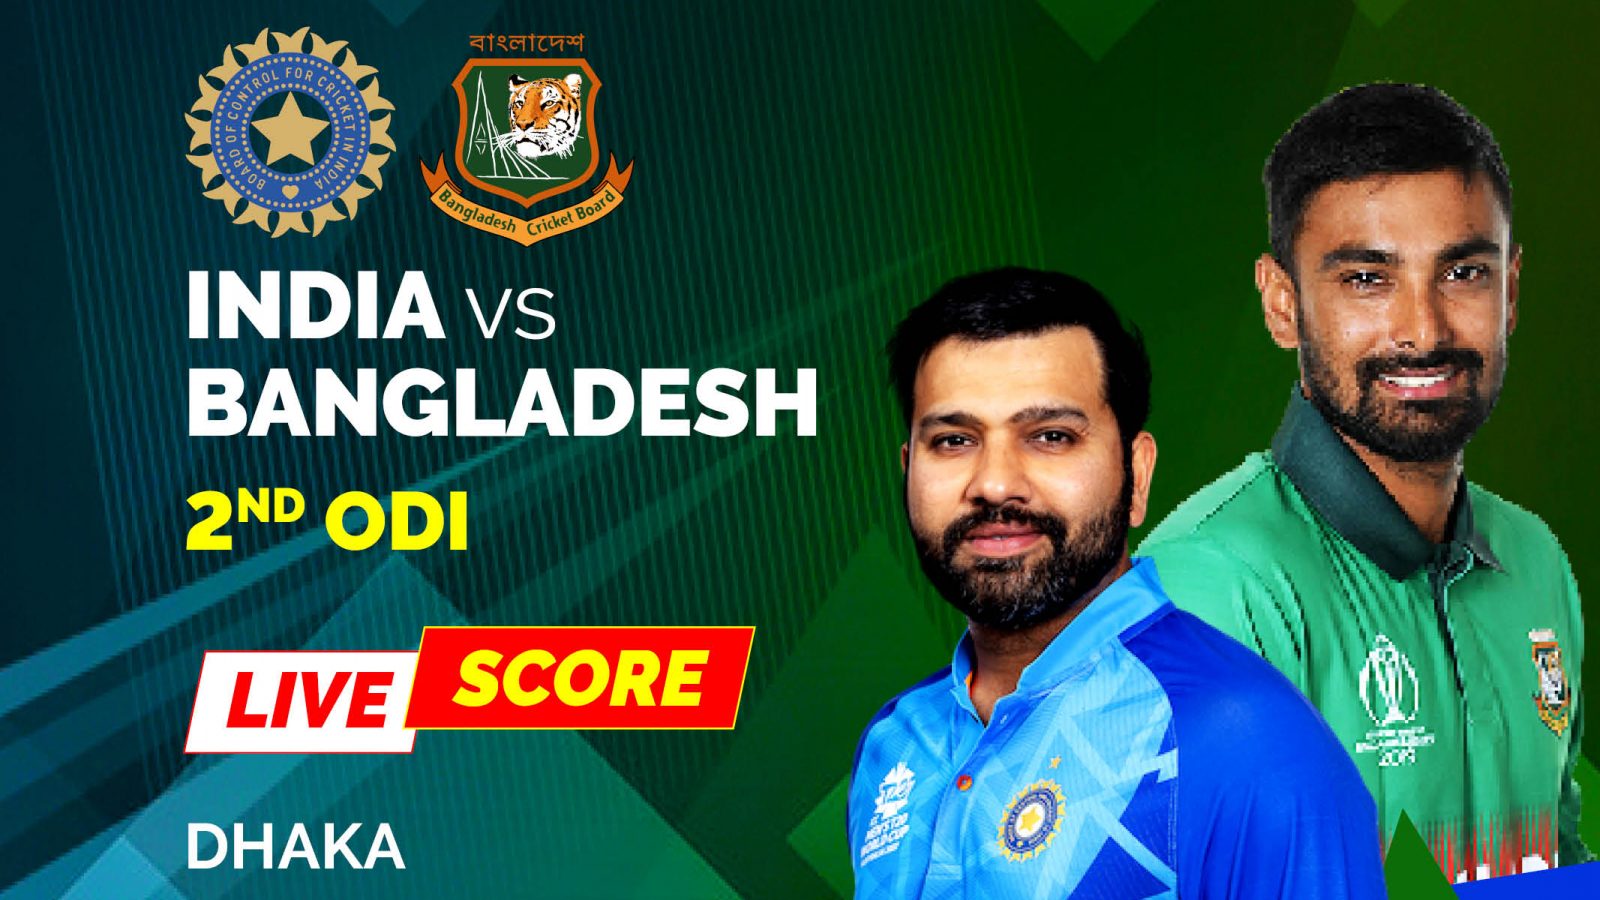 India vs Bangladesh Highlights 2nd ODI IND Lose to BAN Despite a Heroic Fifty From Rohit Sharma